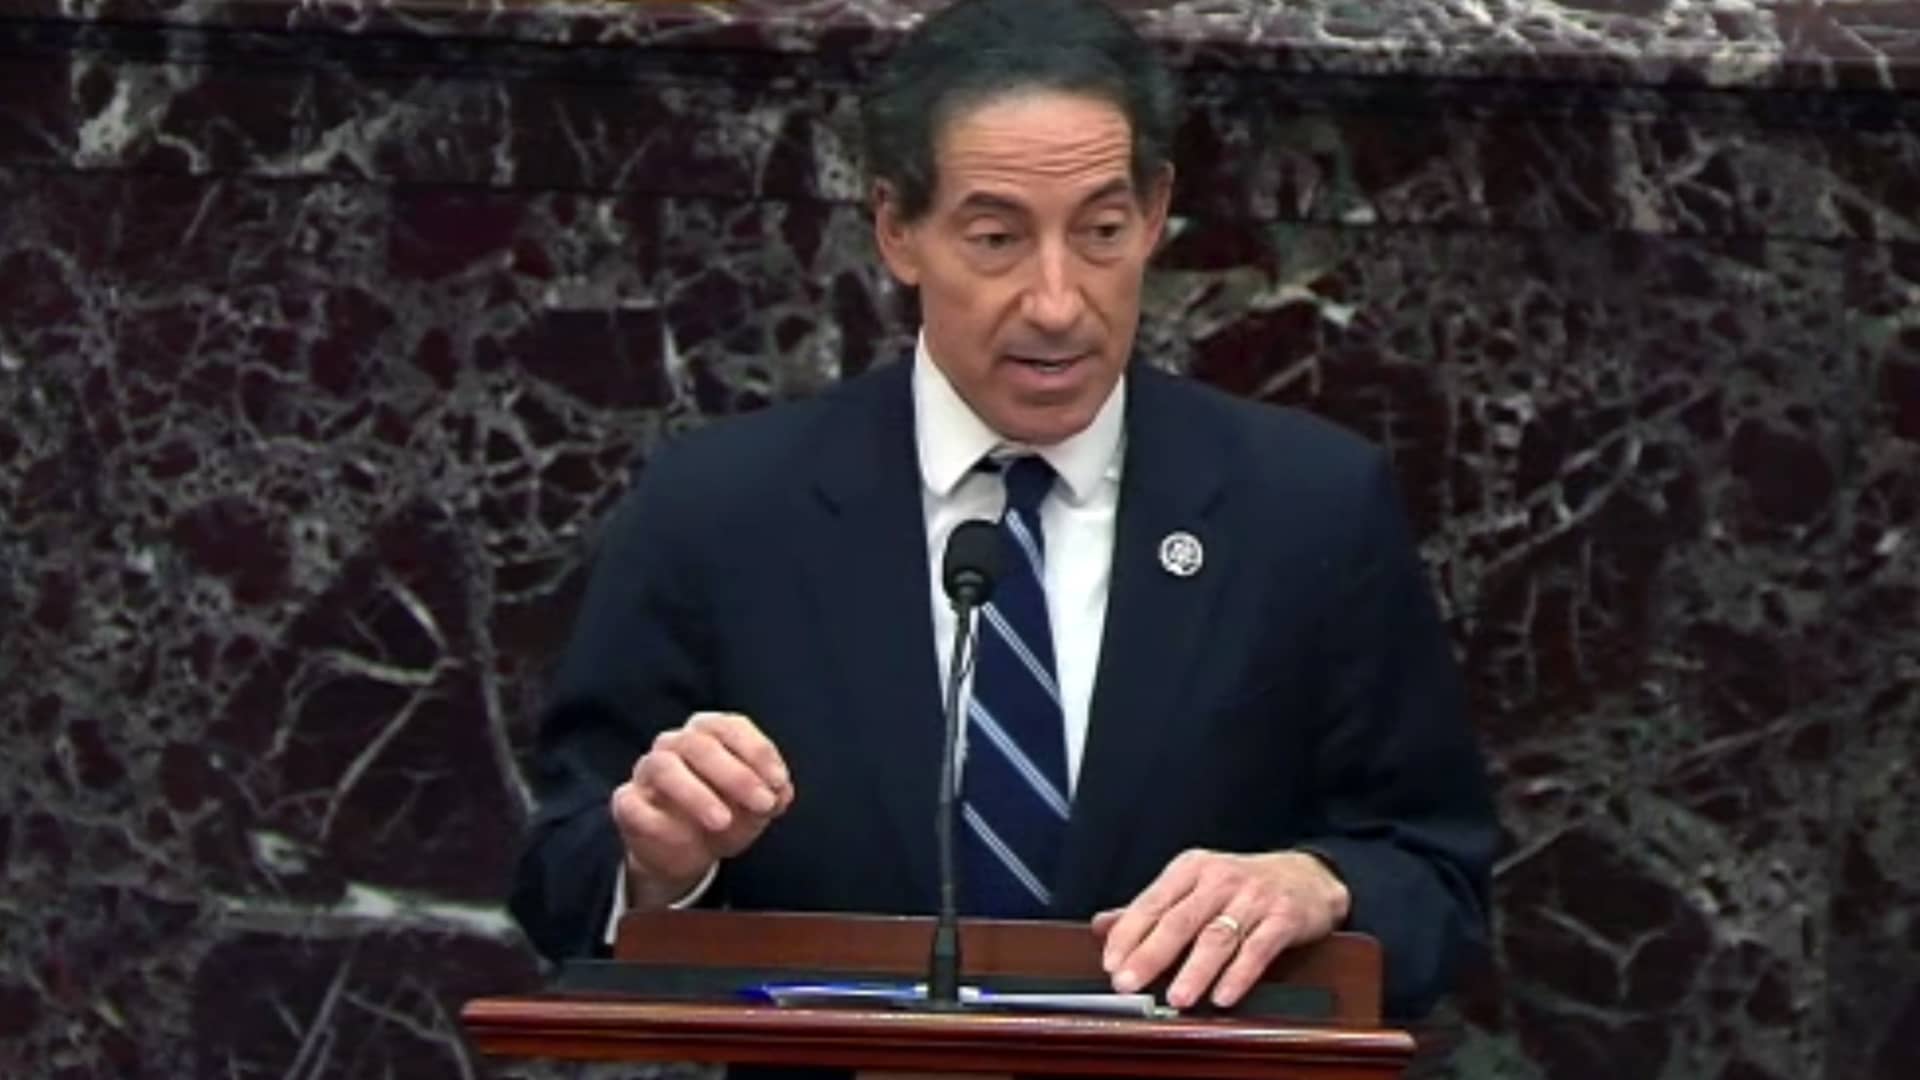 In this screenshot taken from a congress.gov webcast, lead House impeachment manager Rep. Jamie Raskin (D-MD) speaks on the fifth day of former President Donald Trump's second impeachment trial at the U.S. Capitol on February 13, 2021 in Washington, DC.